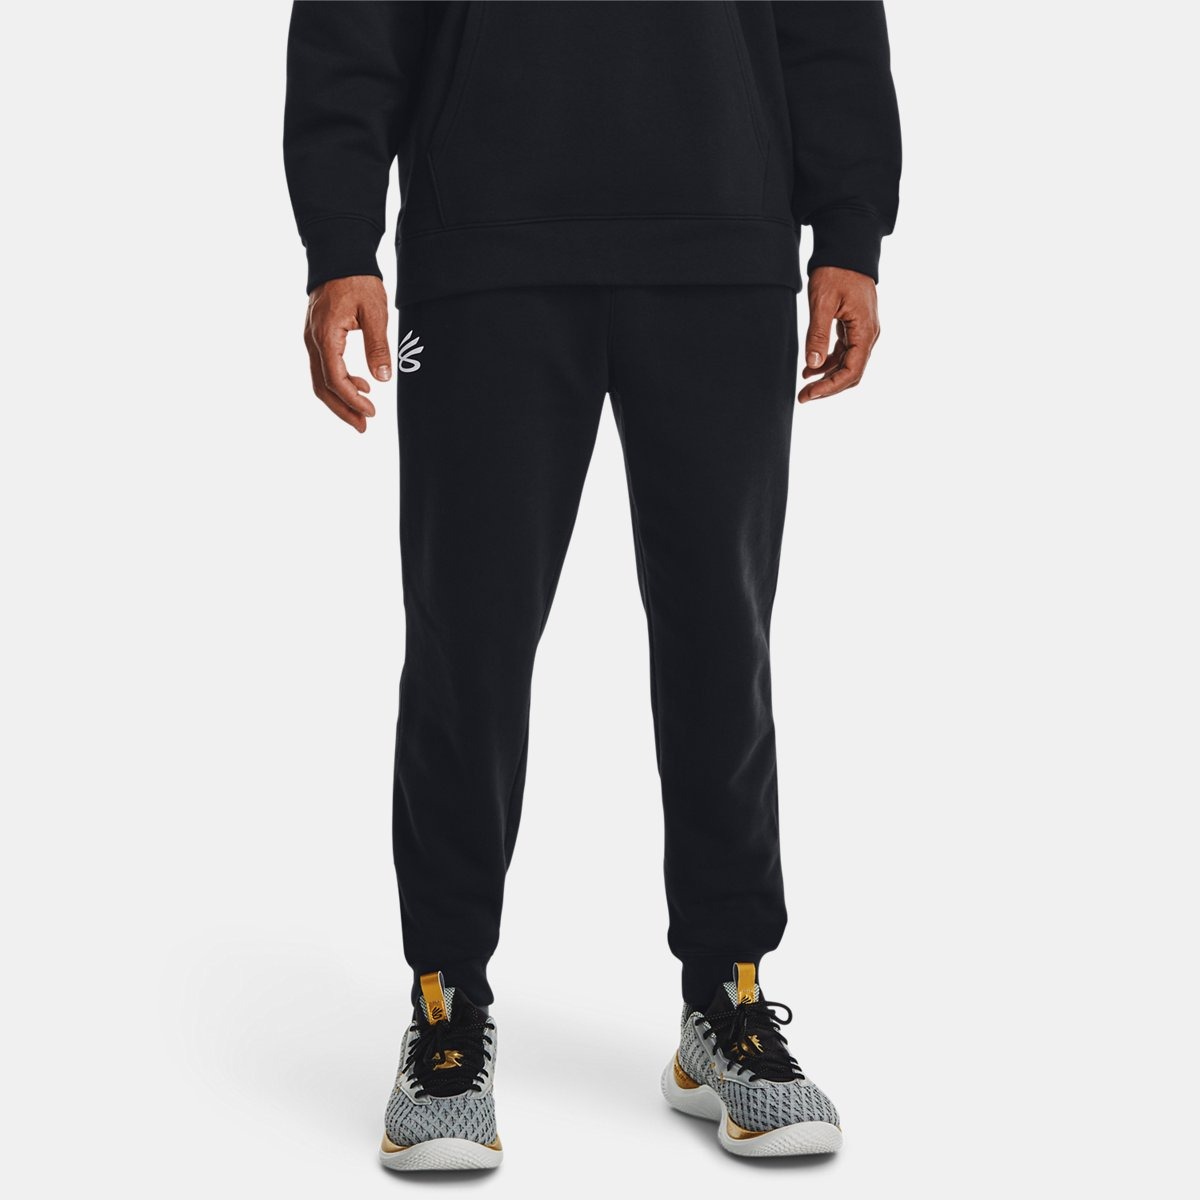 Sweatpants in Black for Man at Under Armour GOOFASH